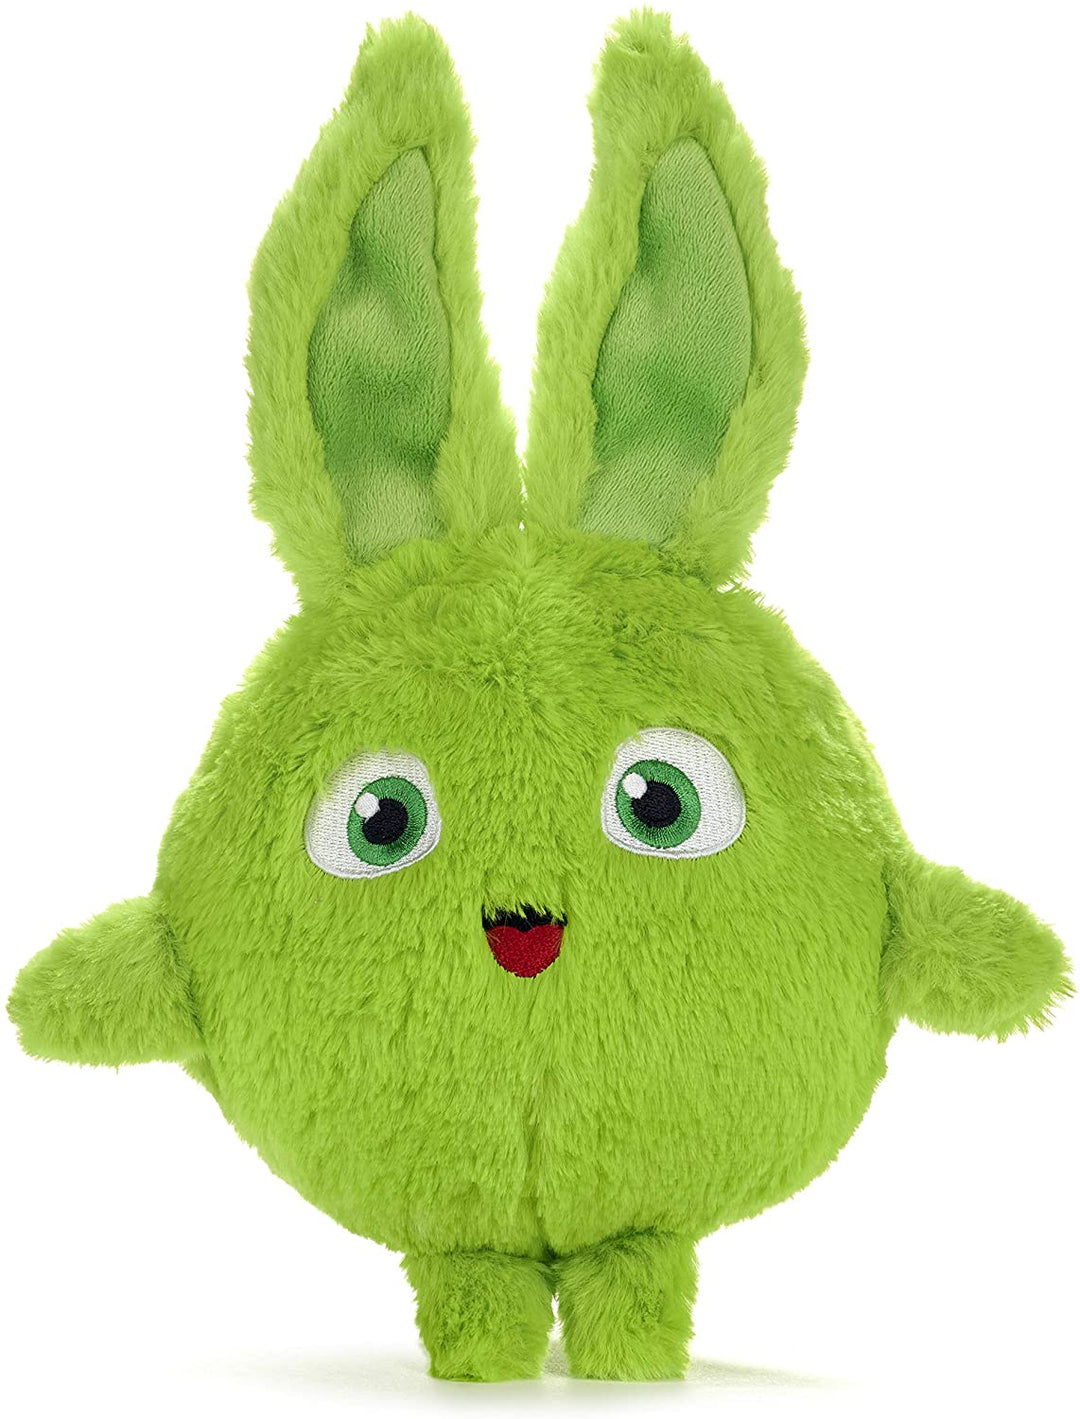 Posh Paws 37429 Sunny Bunnies Large Feature Hopper Giggle & Hop Soft Toy 29cm (11 inch)